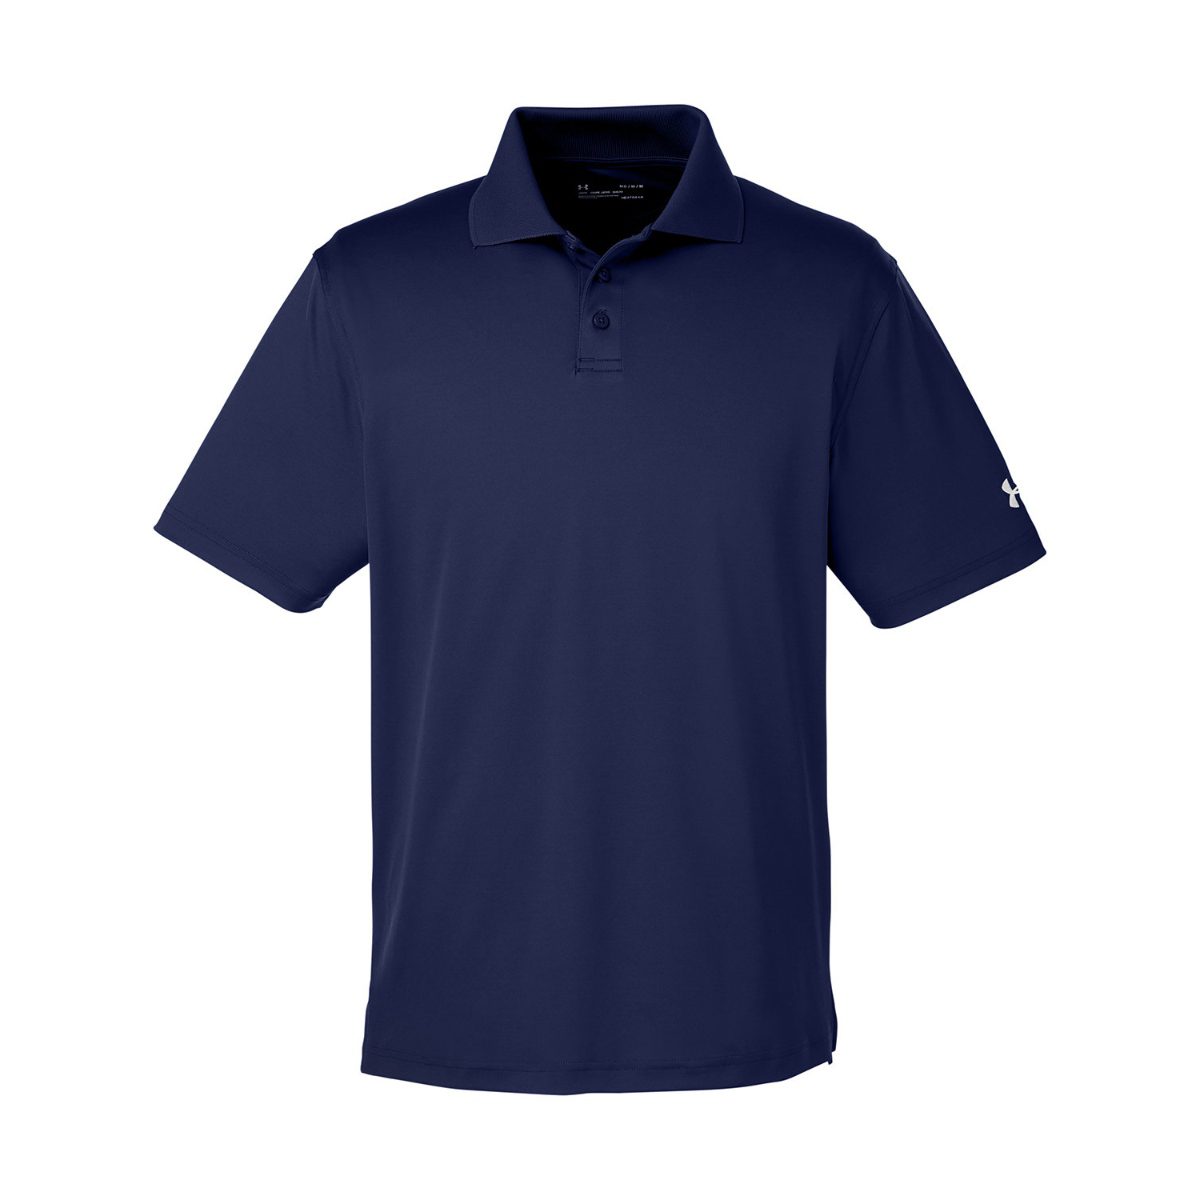 UNDER ARMOUR® Men's Corp Performance Polo #1261172 Navy